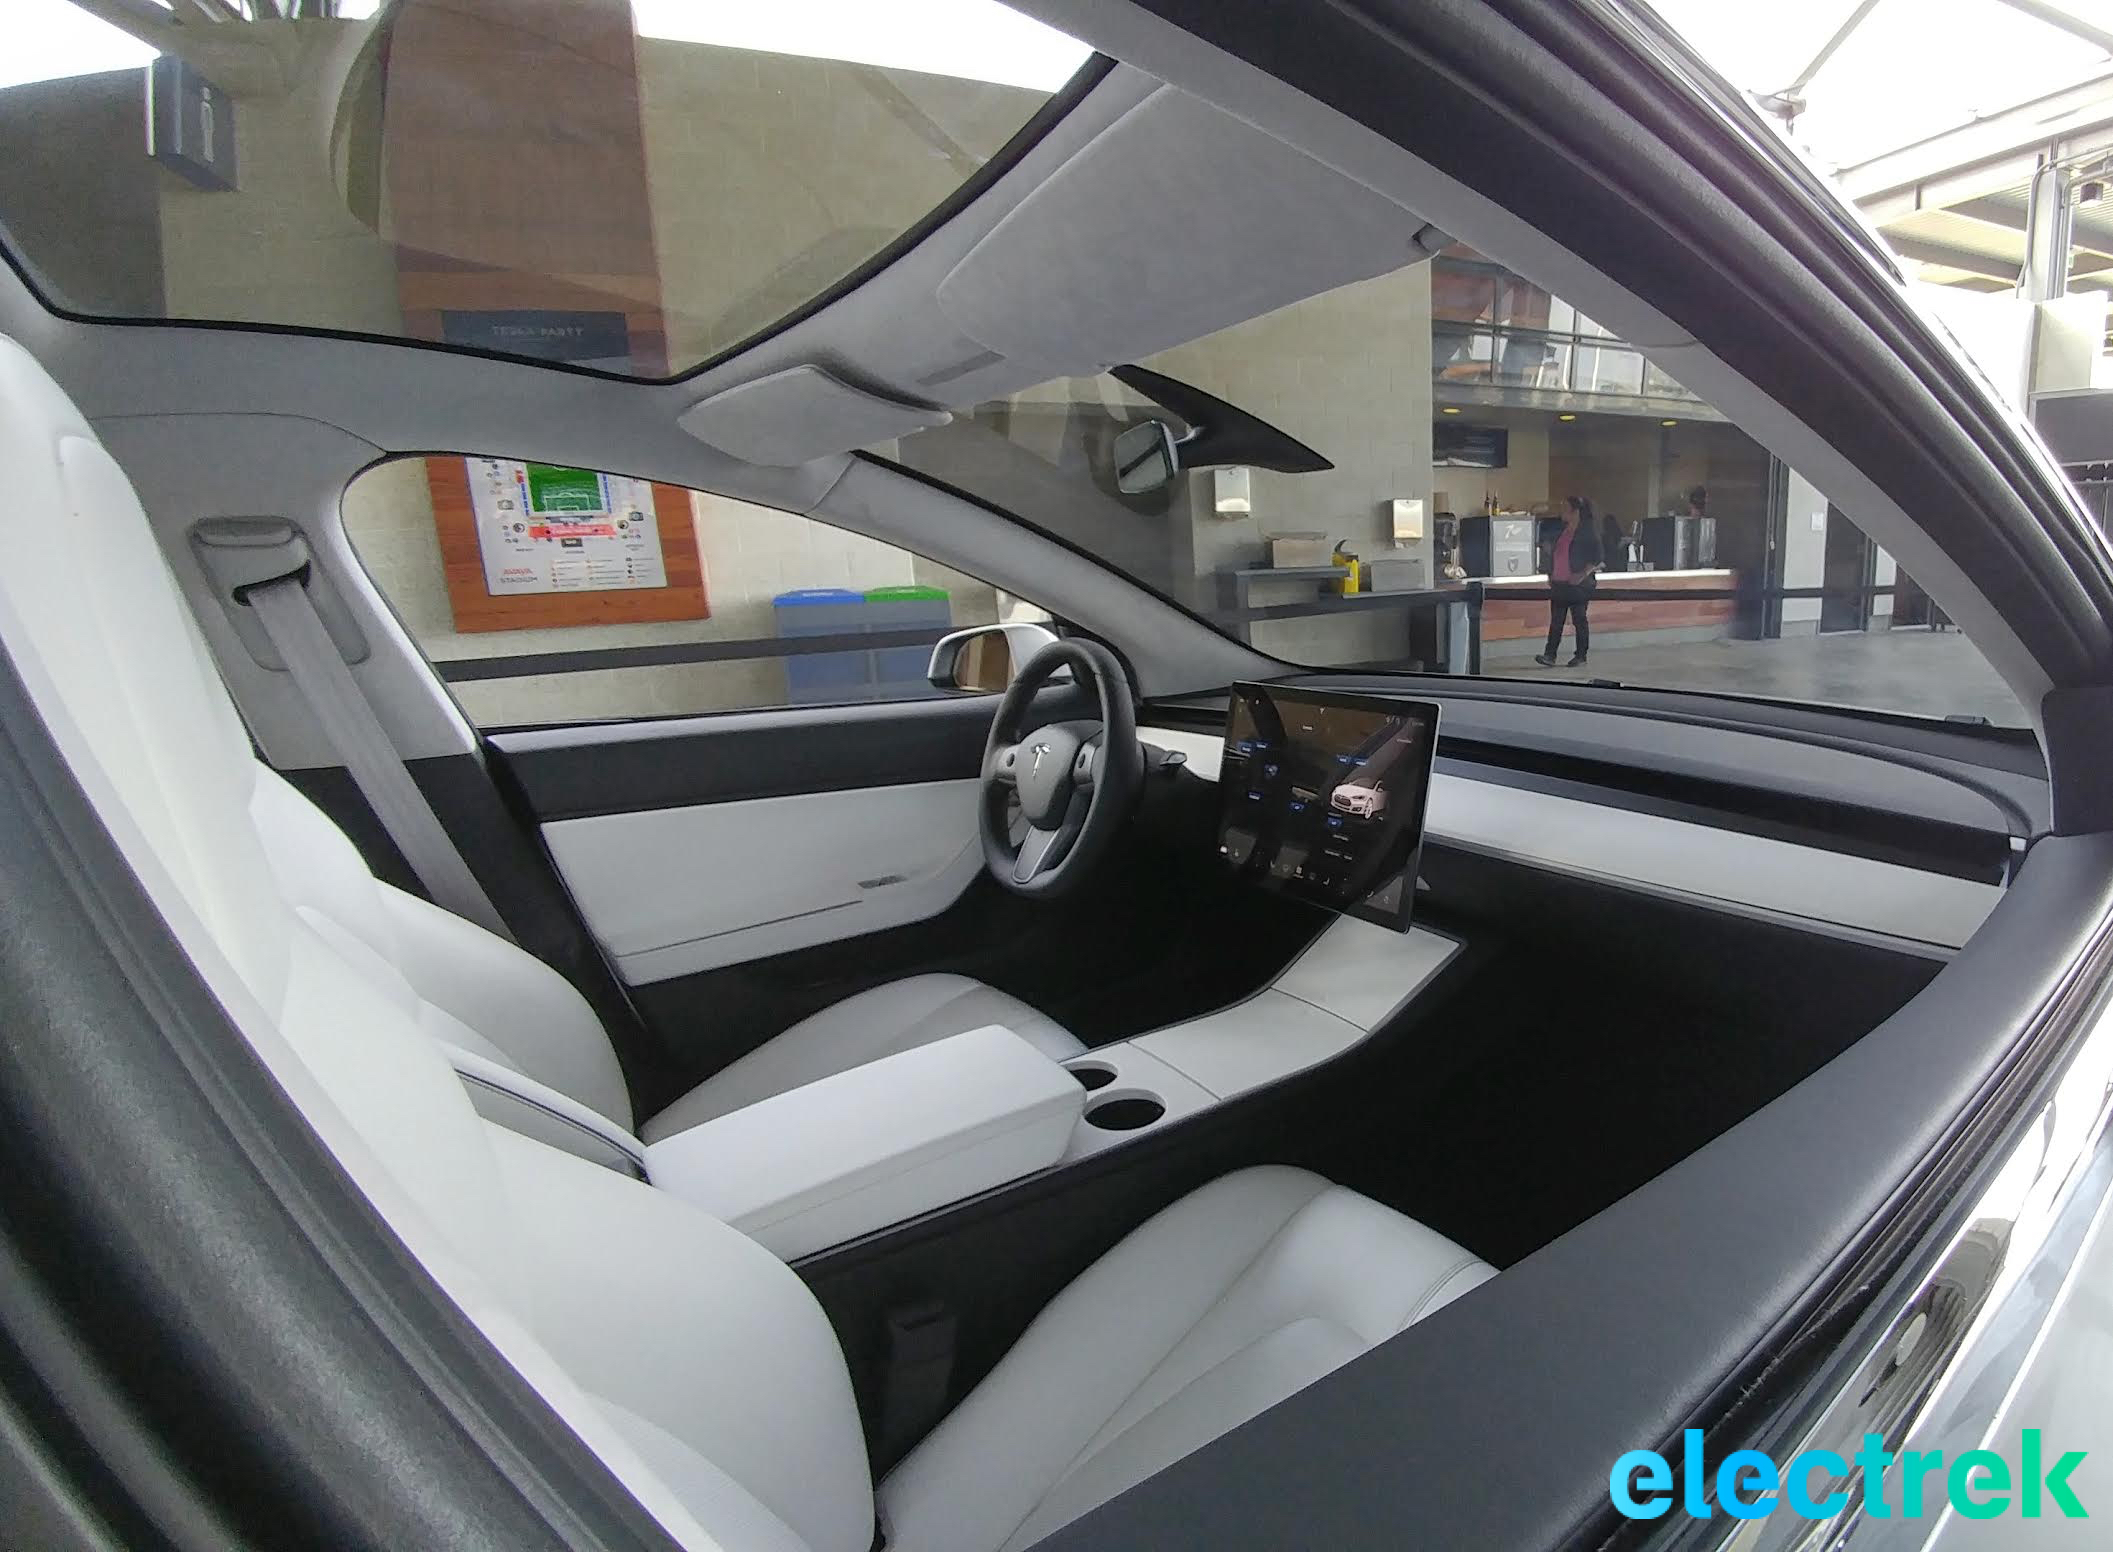 Tesla Model 3 new interior image highlights the puzzle inside the